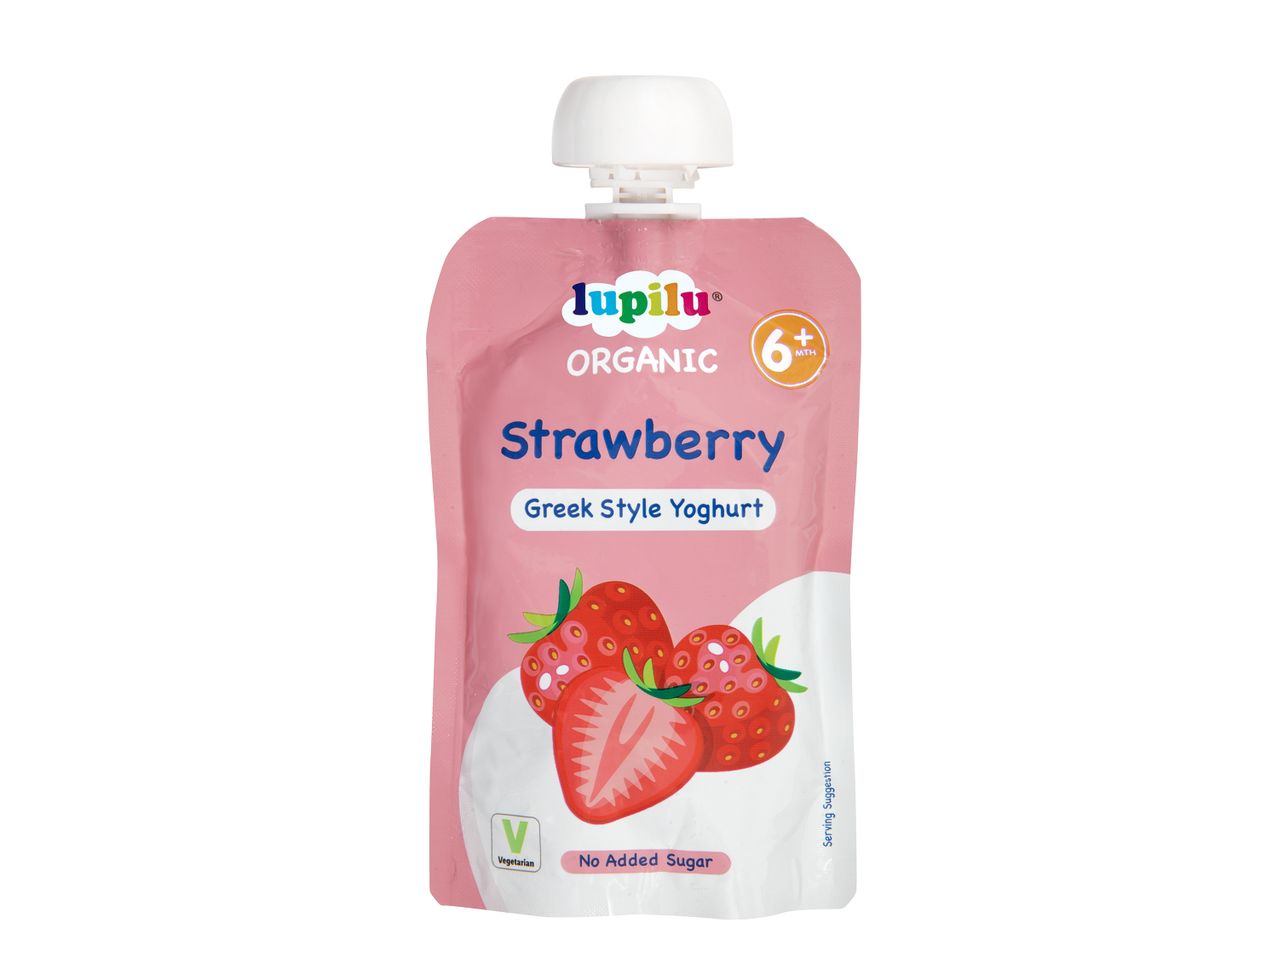 Go to full screen view: Lupilu Organic Strawberry Yoghurt Pouches - Image 1